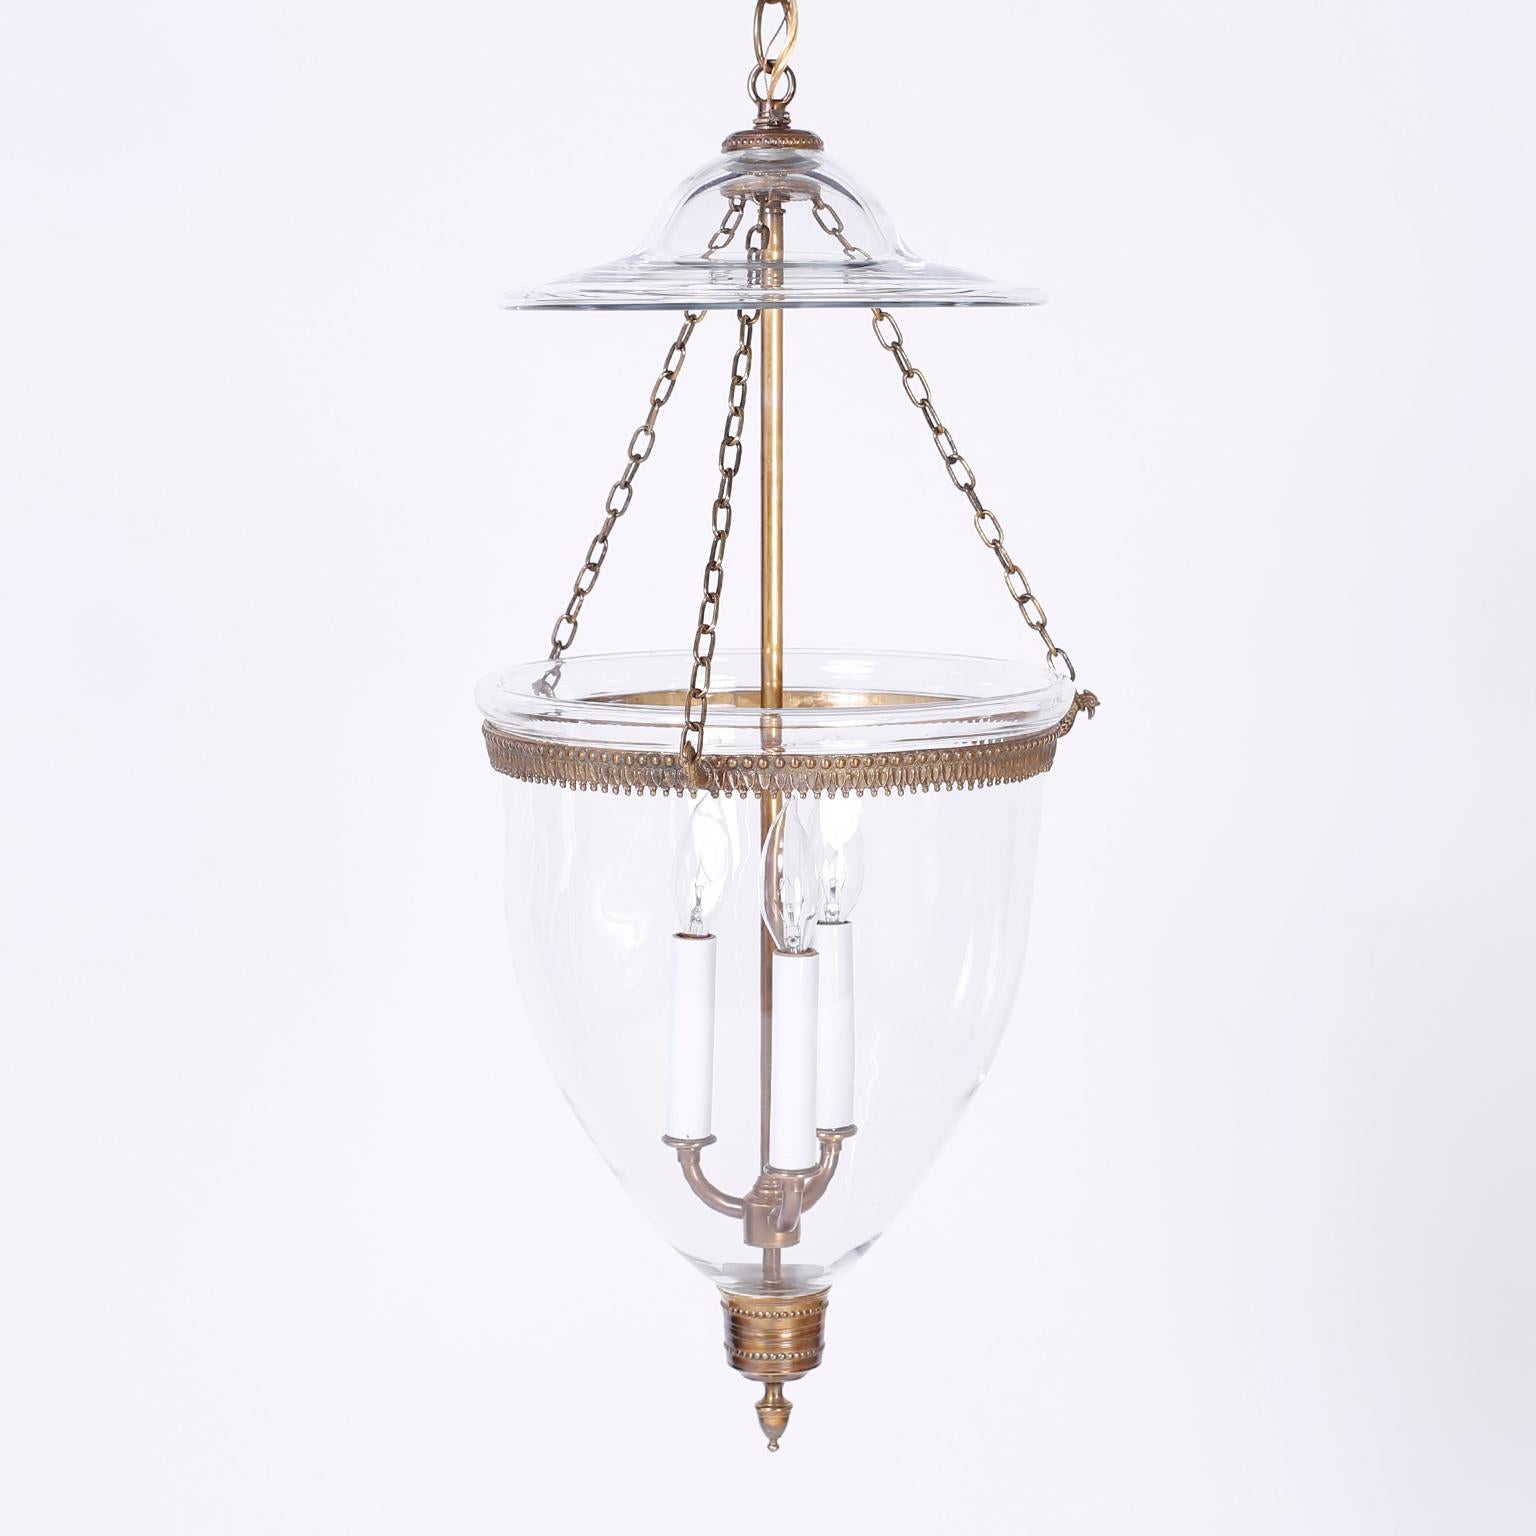 Refined set of three smoke bell light fixture with Classic form, hand blown glass, tooled brass hardware and phoenix bird chain hooks. Priced individually.